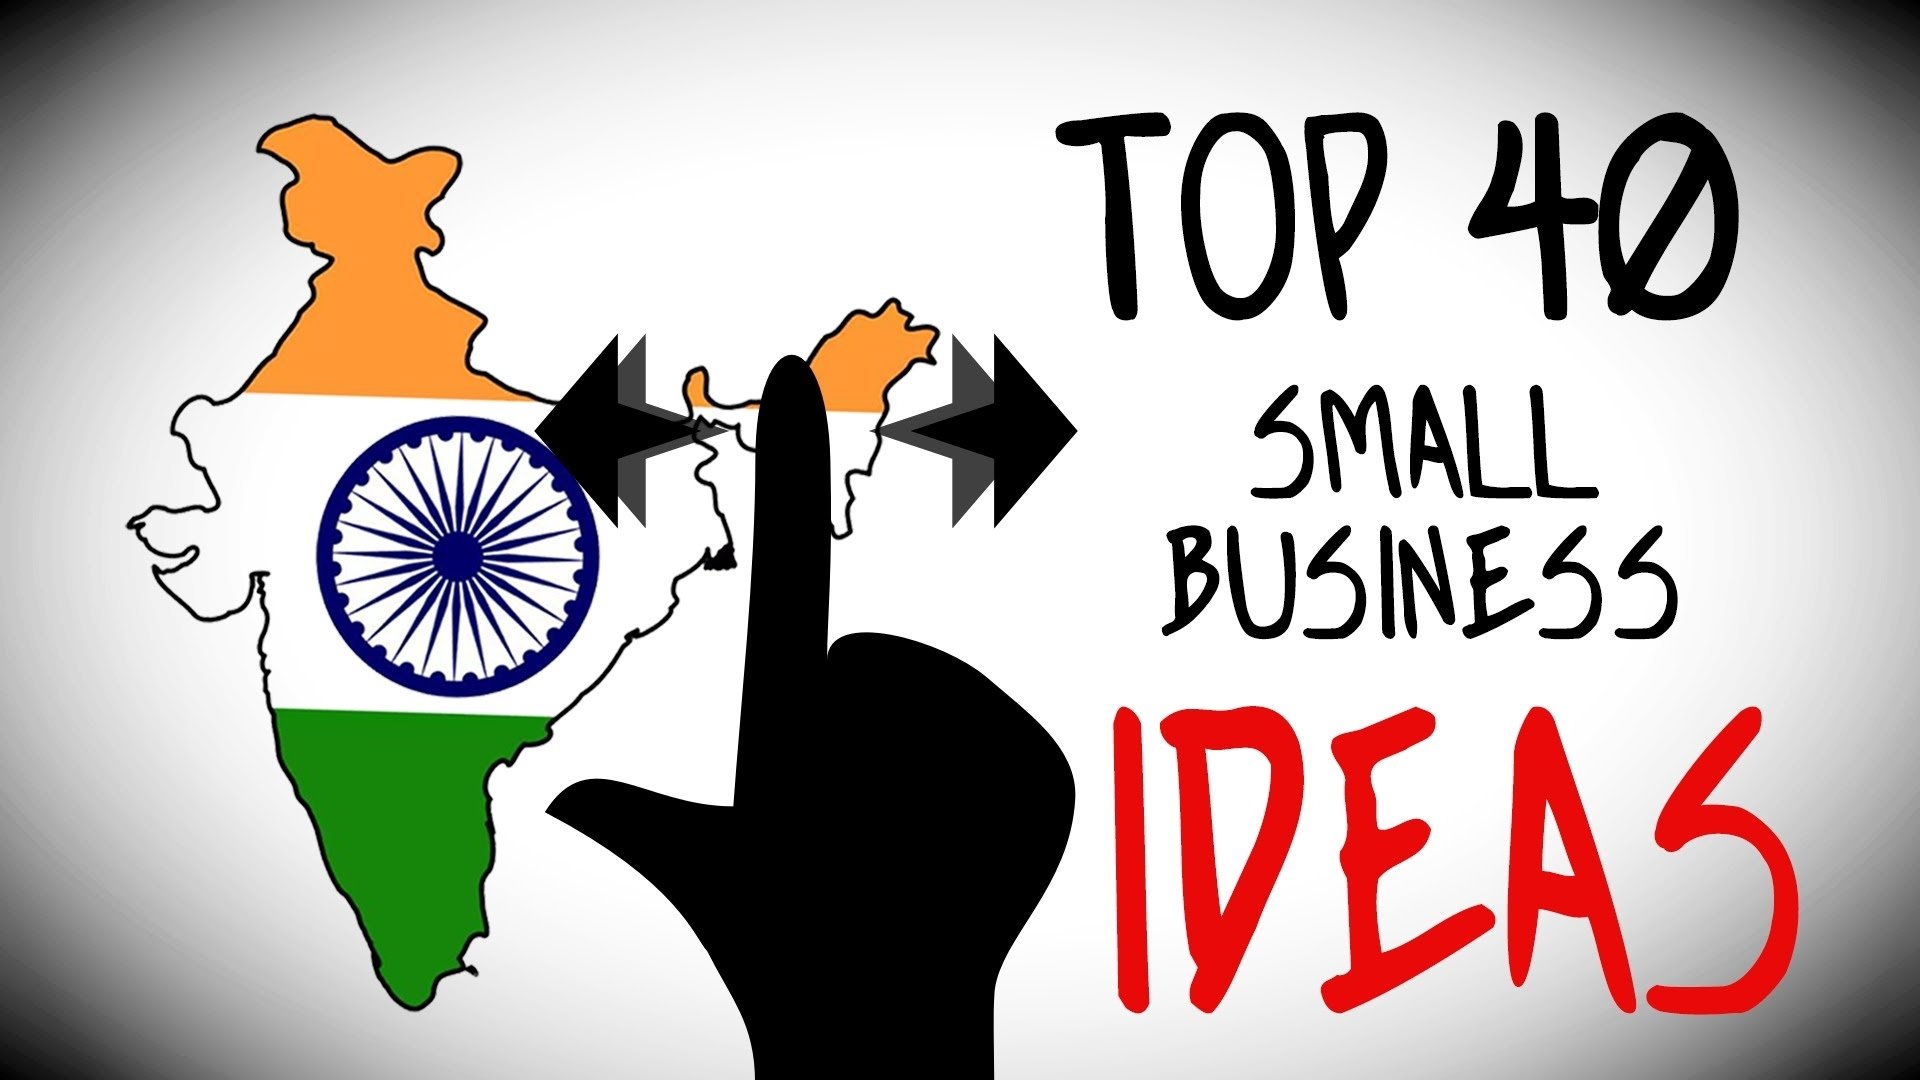 10 Most Popular Easy To Start Business Ideas top 40 small business ideas in india for starting your own business 8 2022